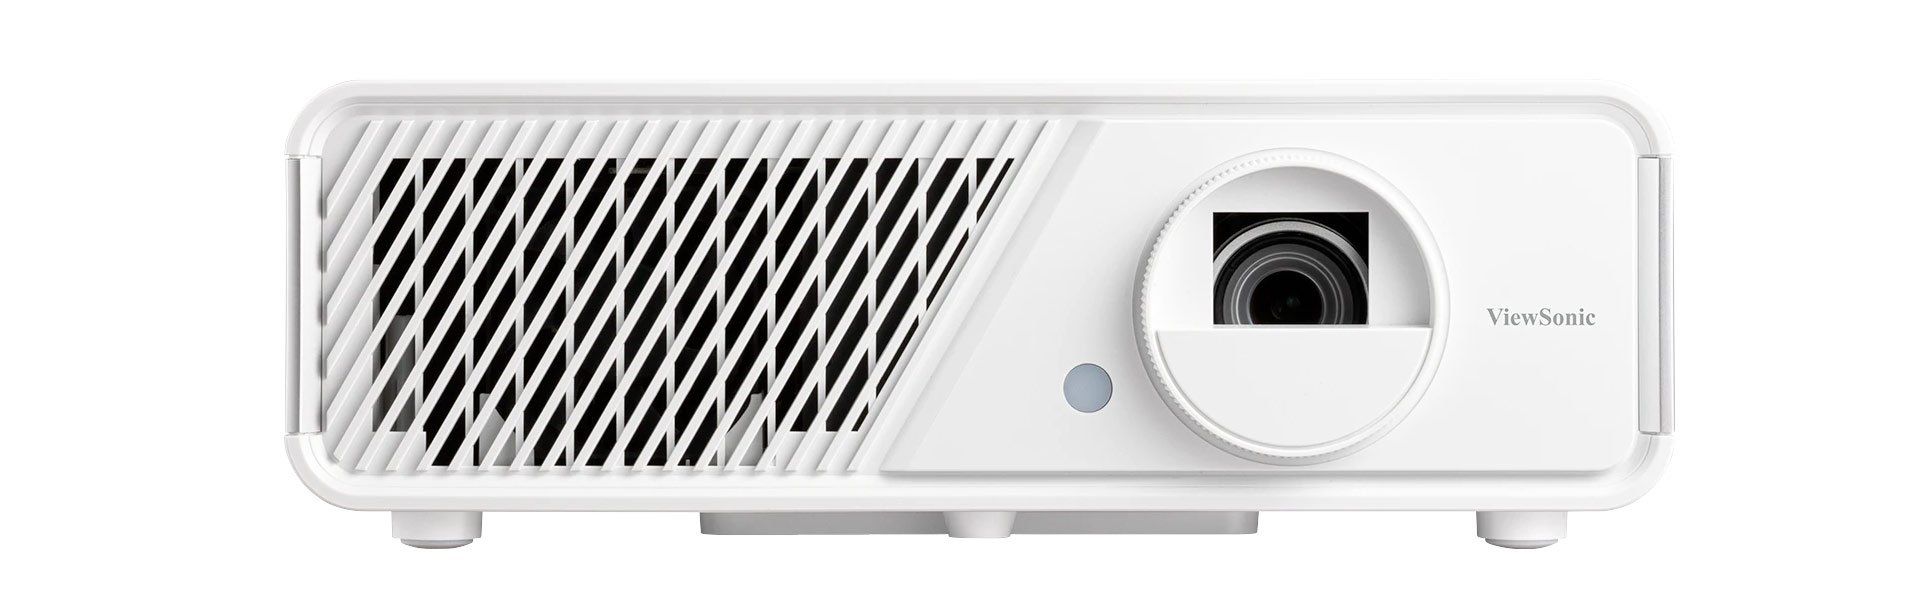 ViewSonic projectors from Projectorpoint